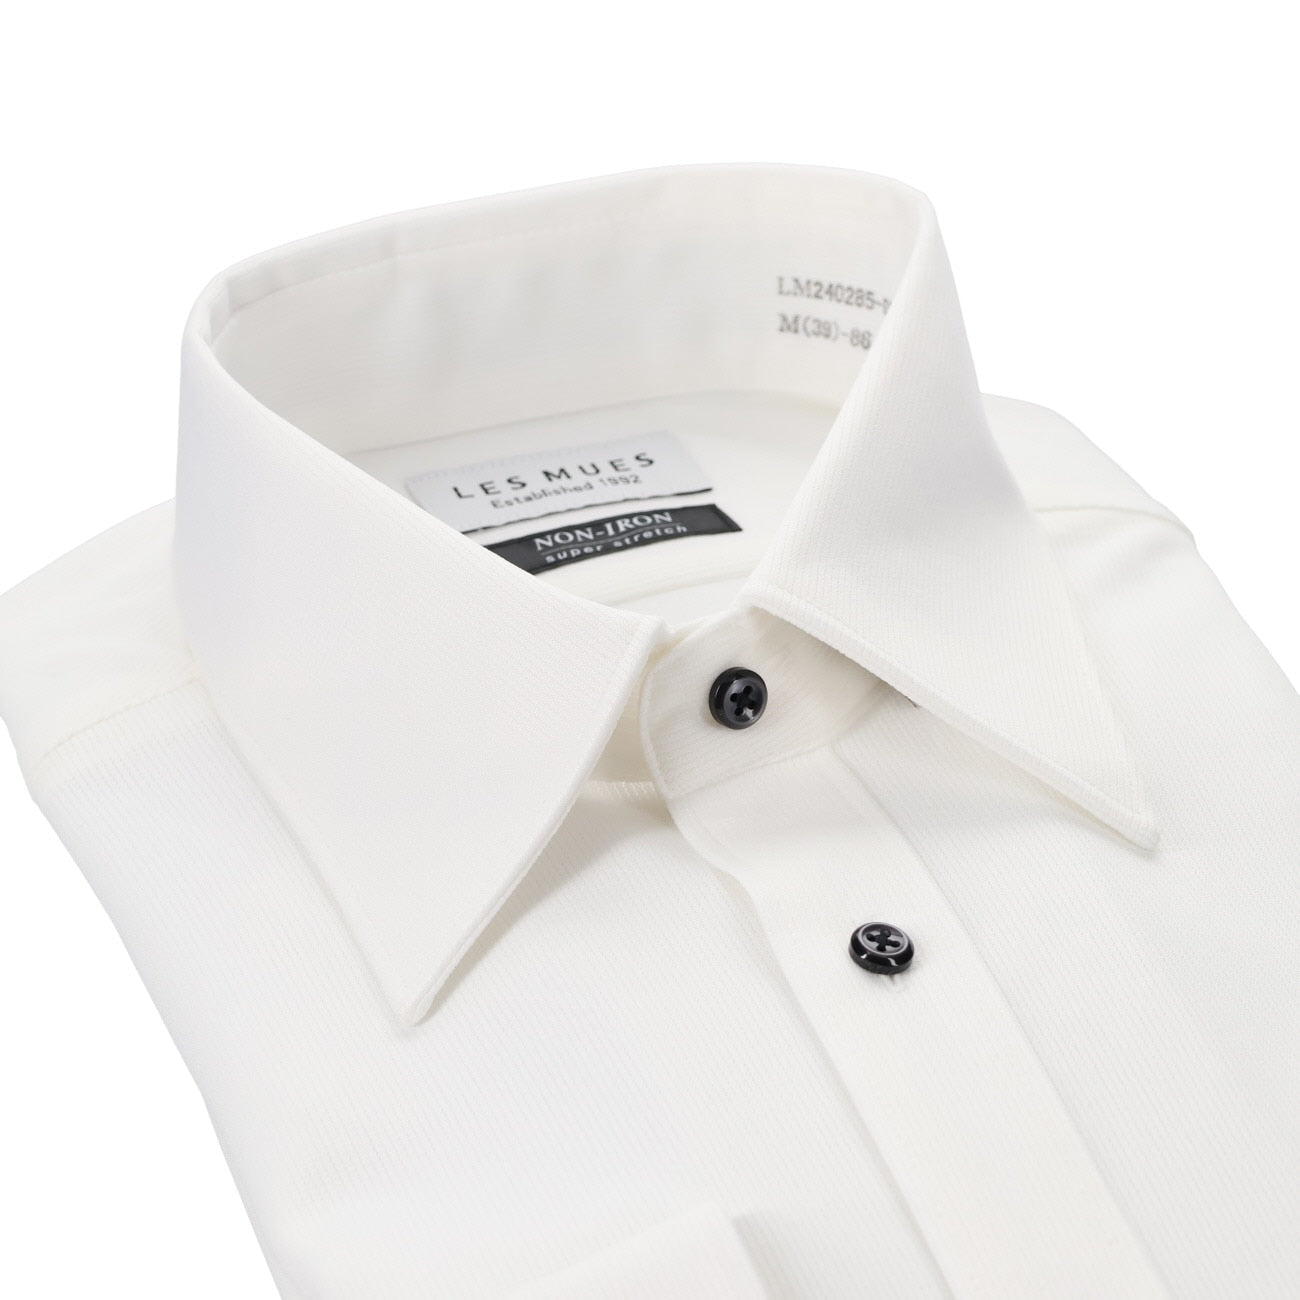 LES MUES Non-iron Super Stretch White Regular Collar Shirt - Regular fit [Recycled Material]